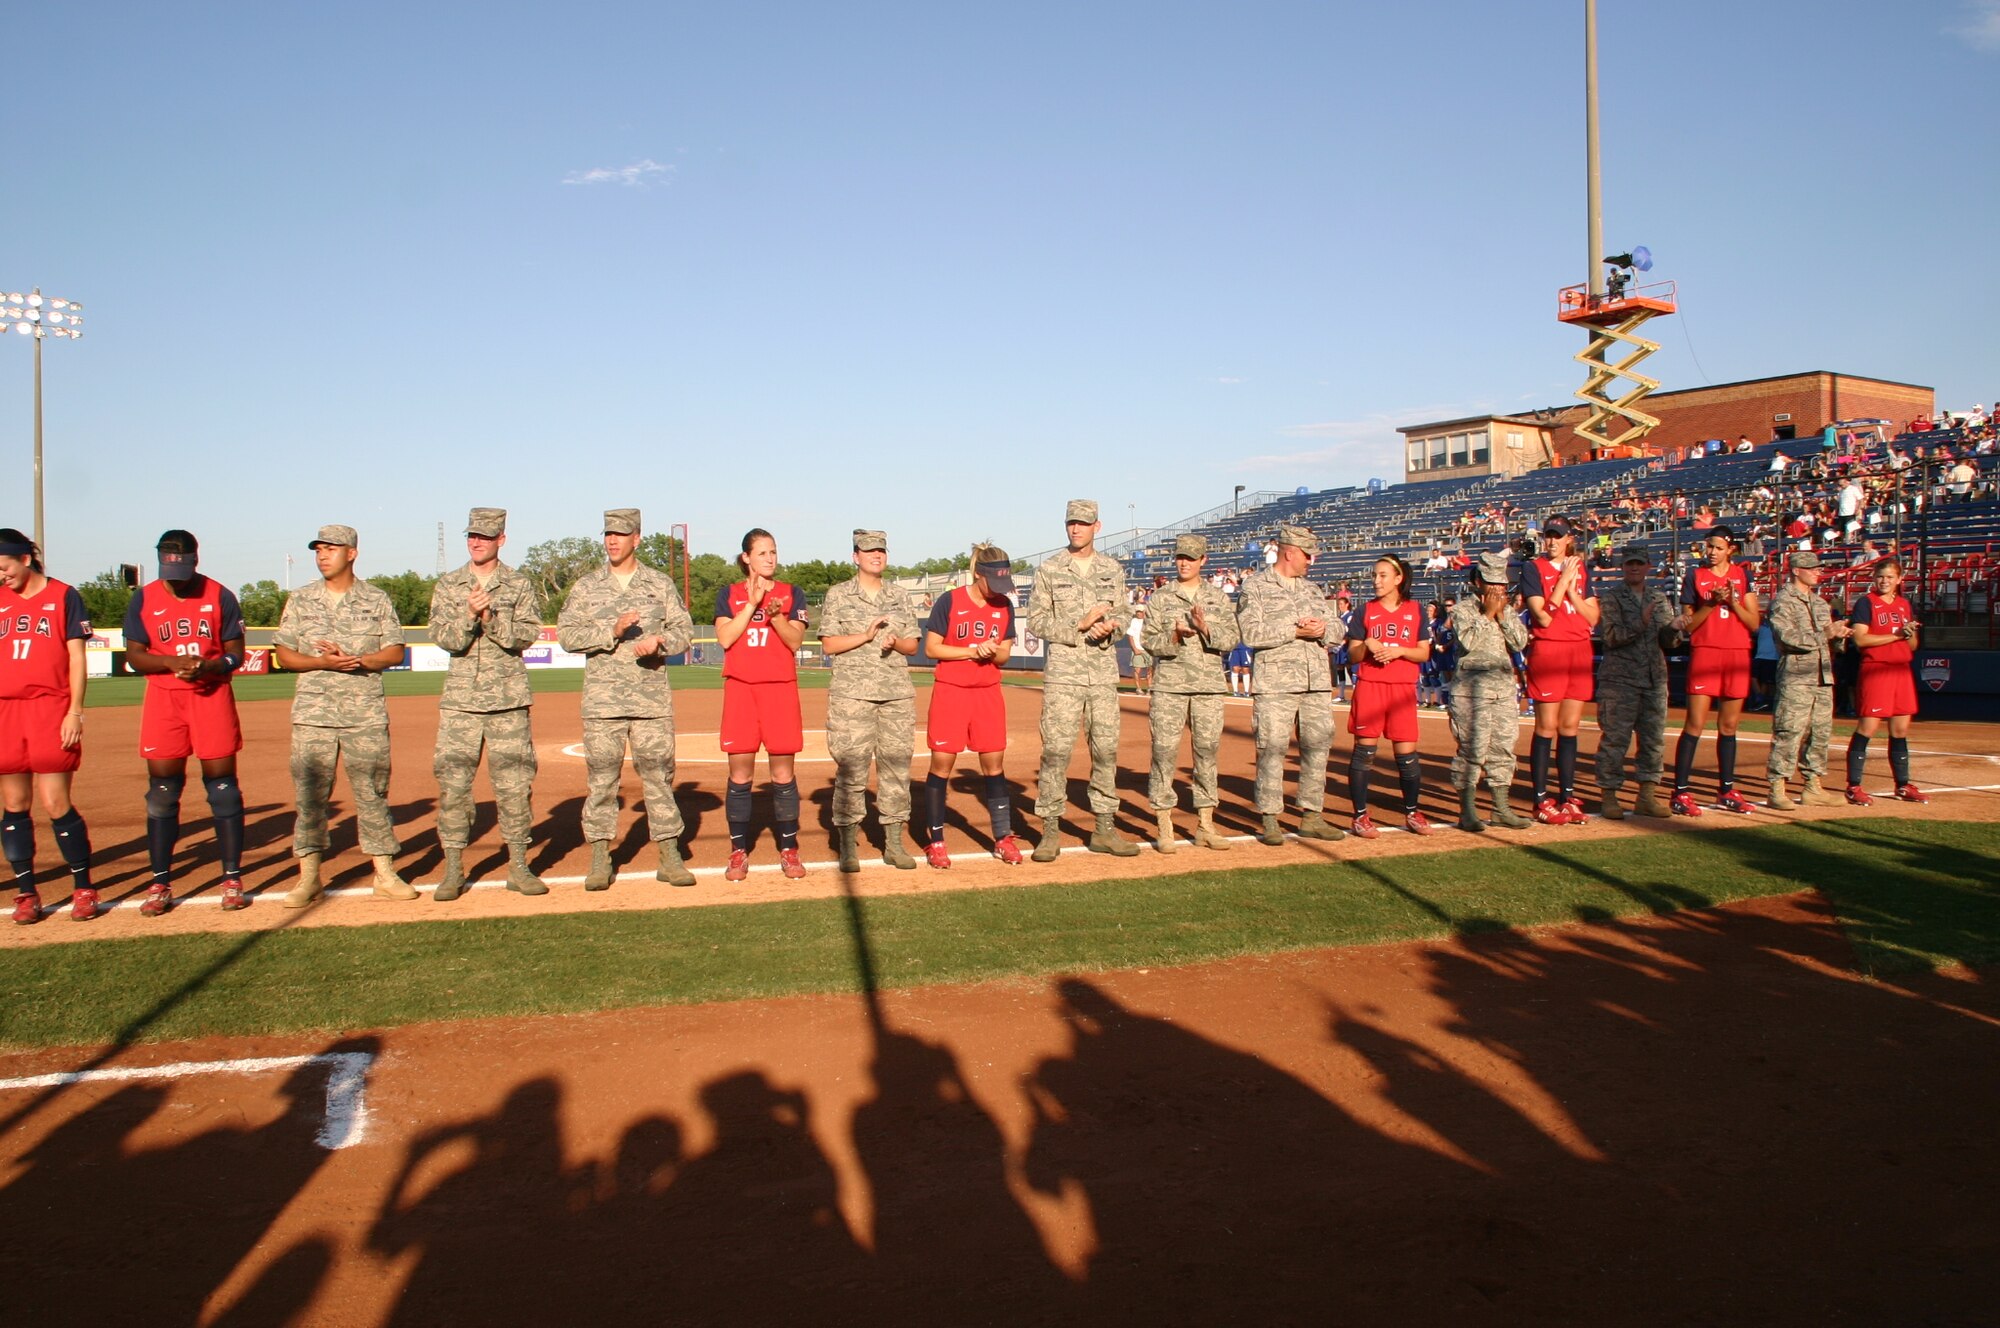 Ten Airmen from the 552nd Air Control Wing were introduced along with the Team USA players as part of Military Appreciation Night at the World Cup of Softball July 17.